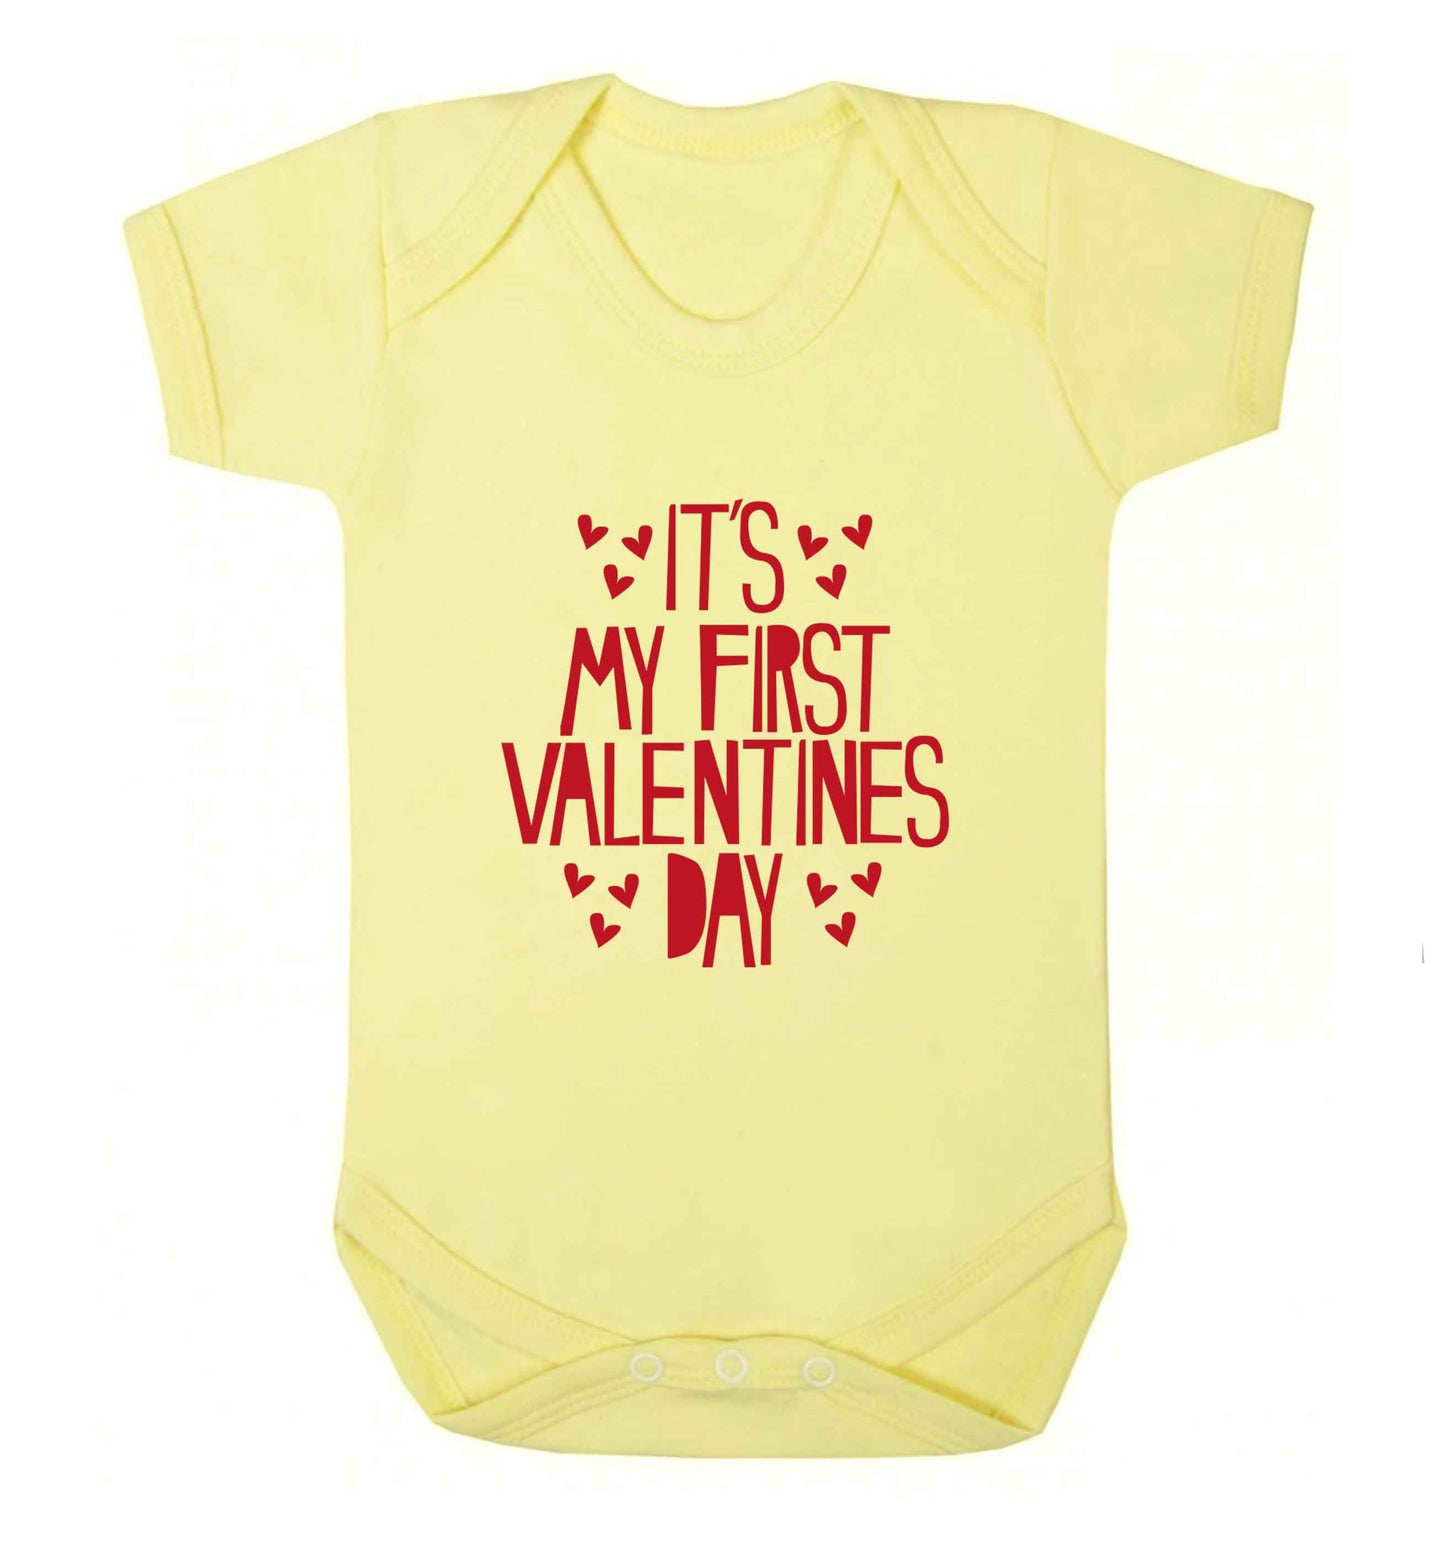 Hearts It's my First Valentine's Day baby vest pale yellow 18-24 months